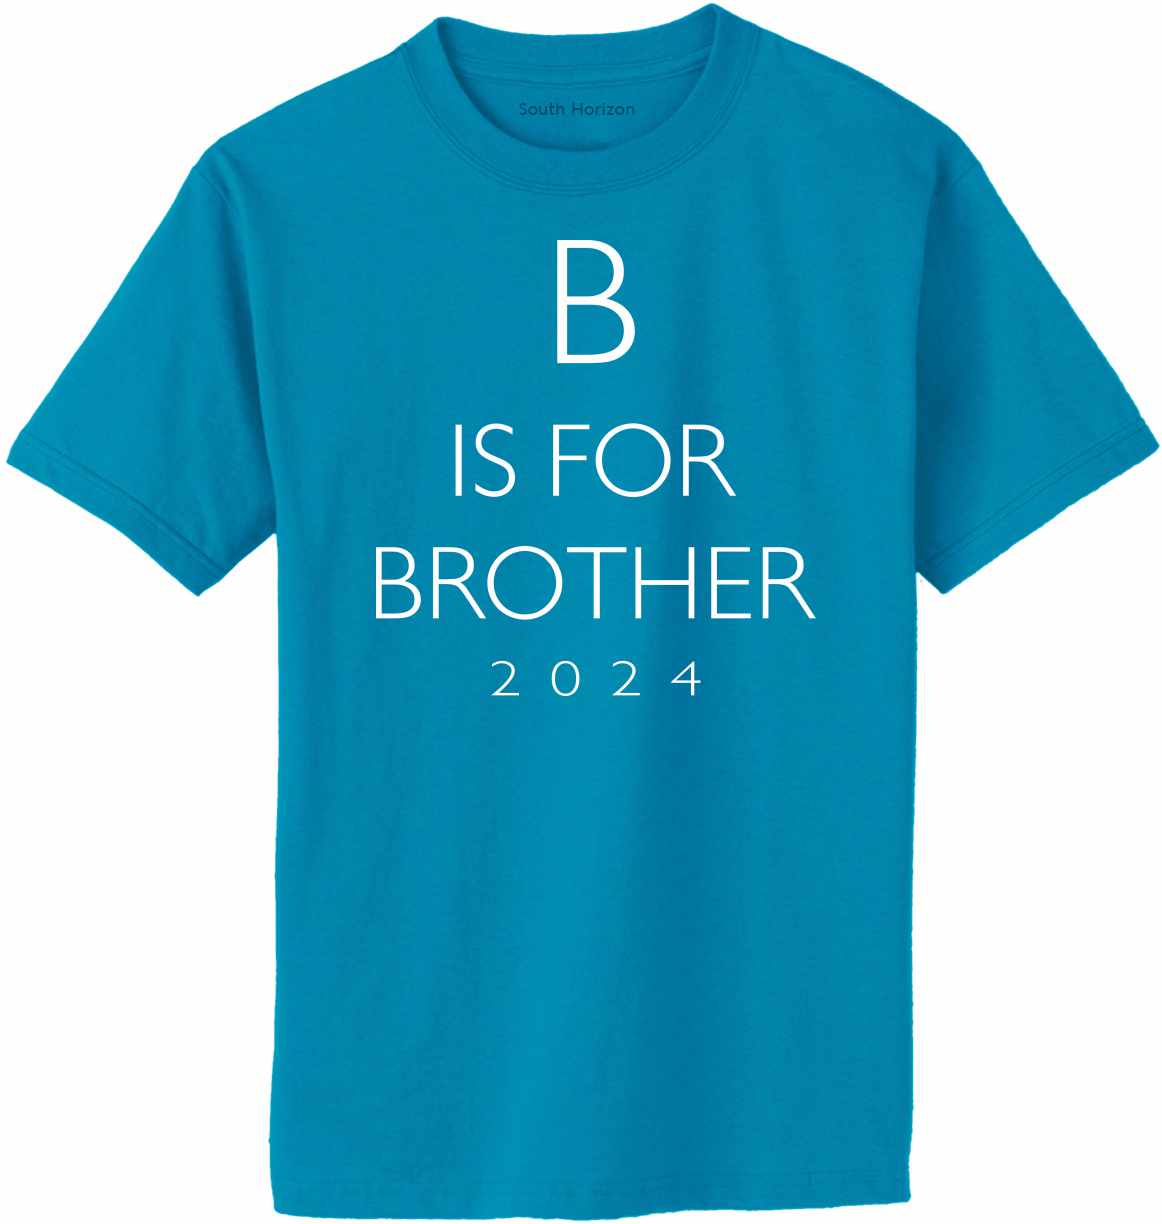 B Is For Brother 2024 on Adult T-Shirt